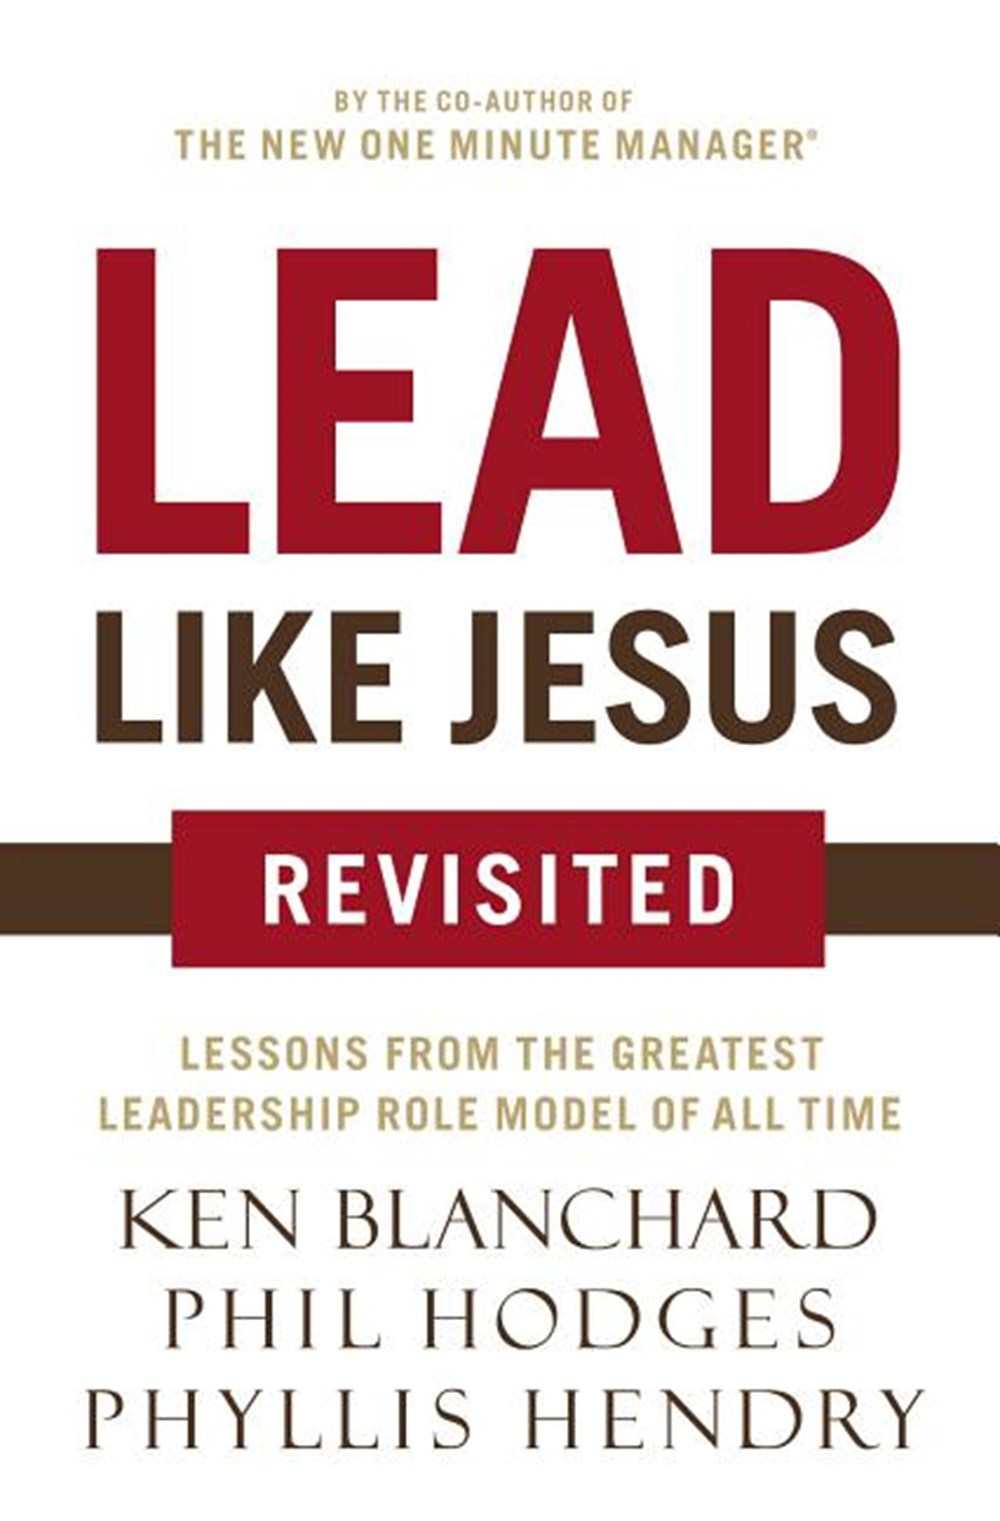 Lead Like Jesus Revisited: Lessons from the Greatest Leadership Role Model of All Time (Revised)